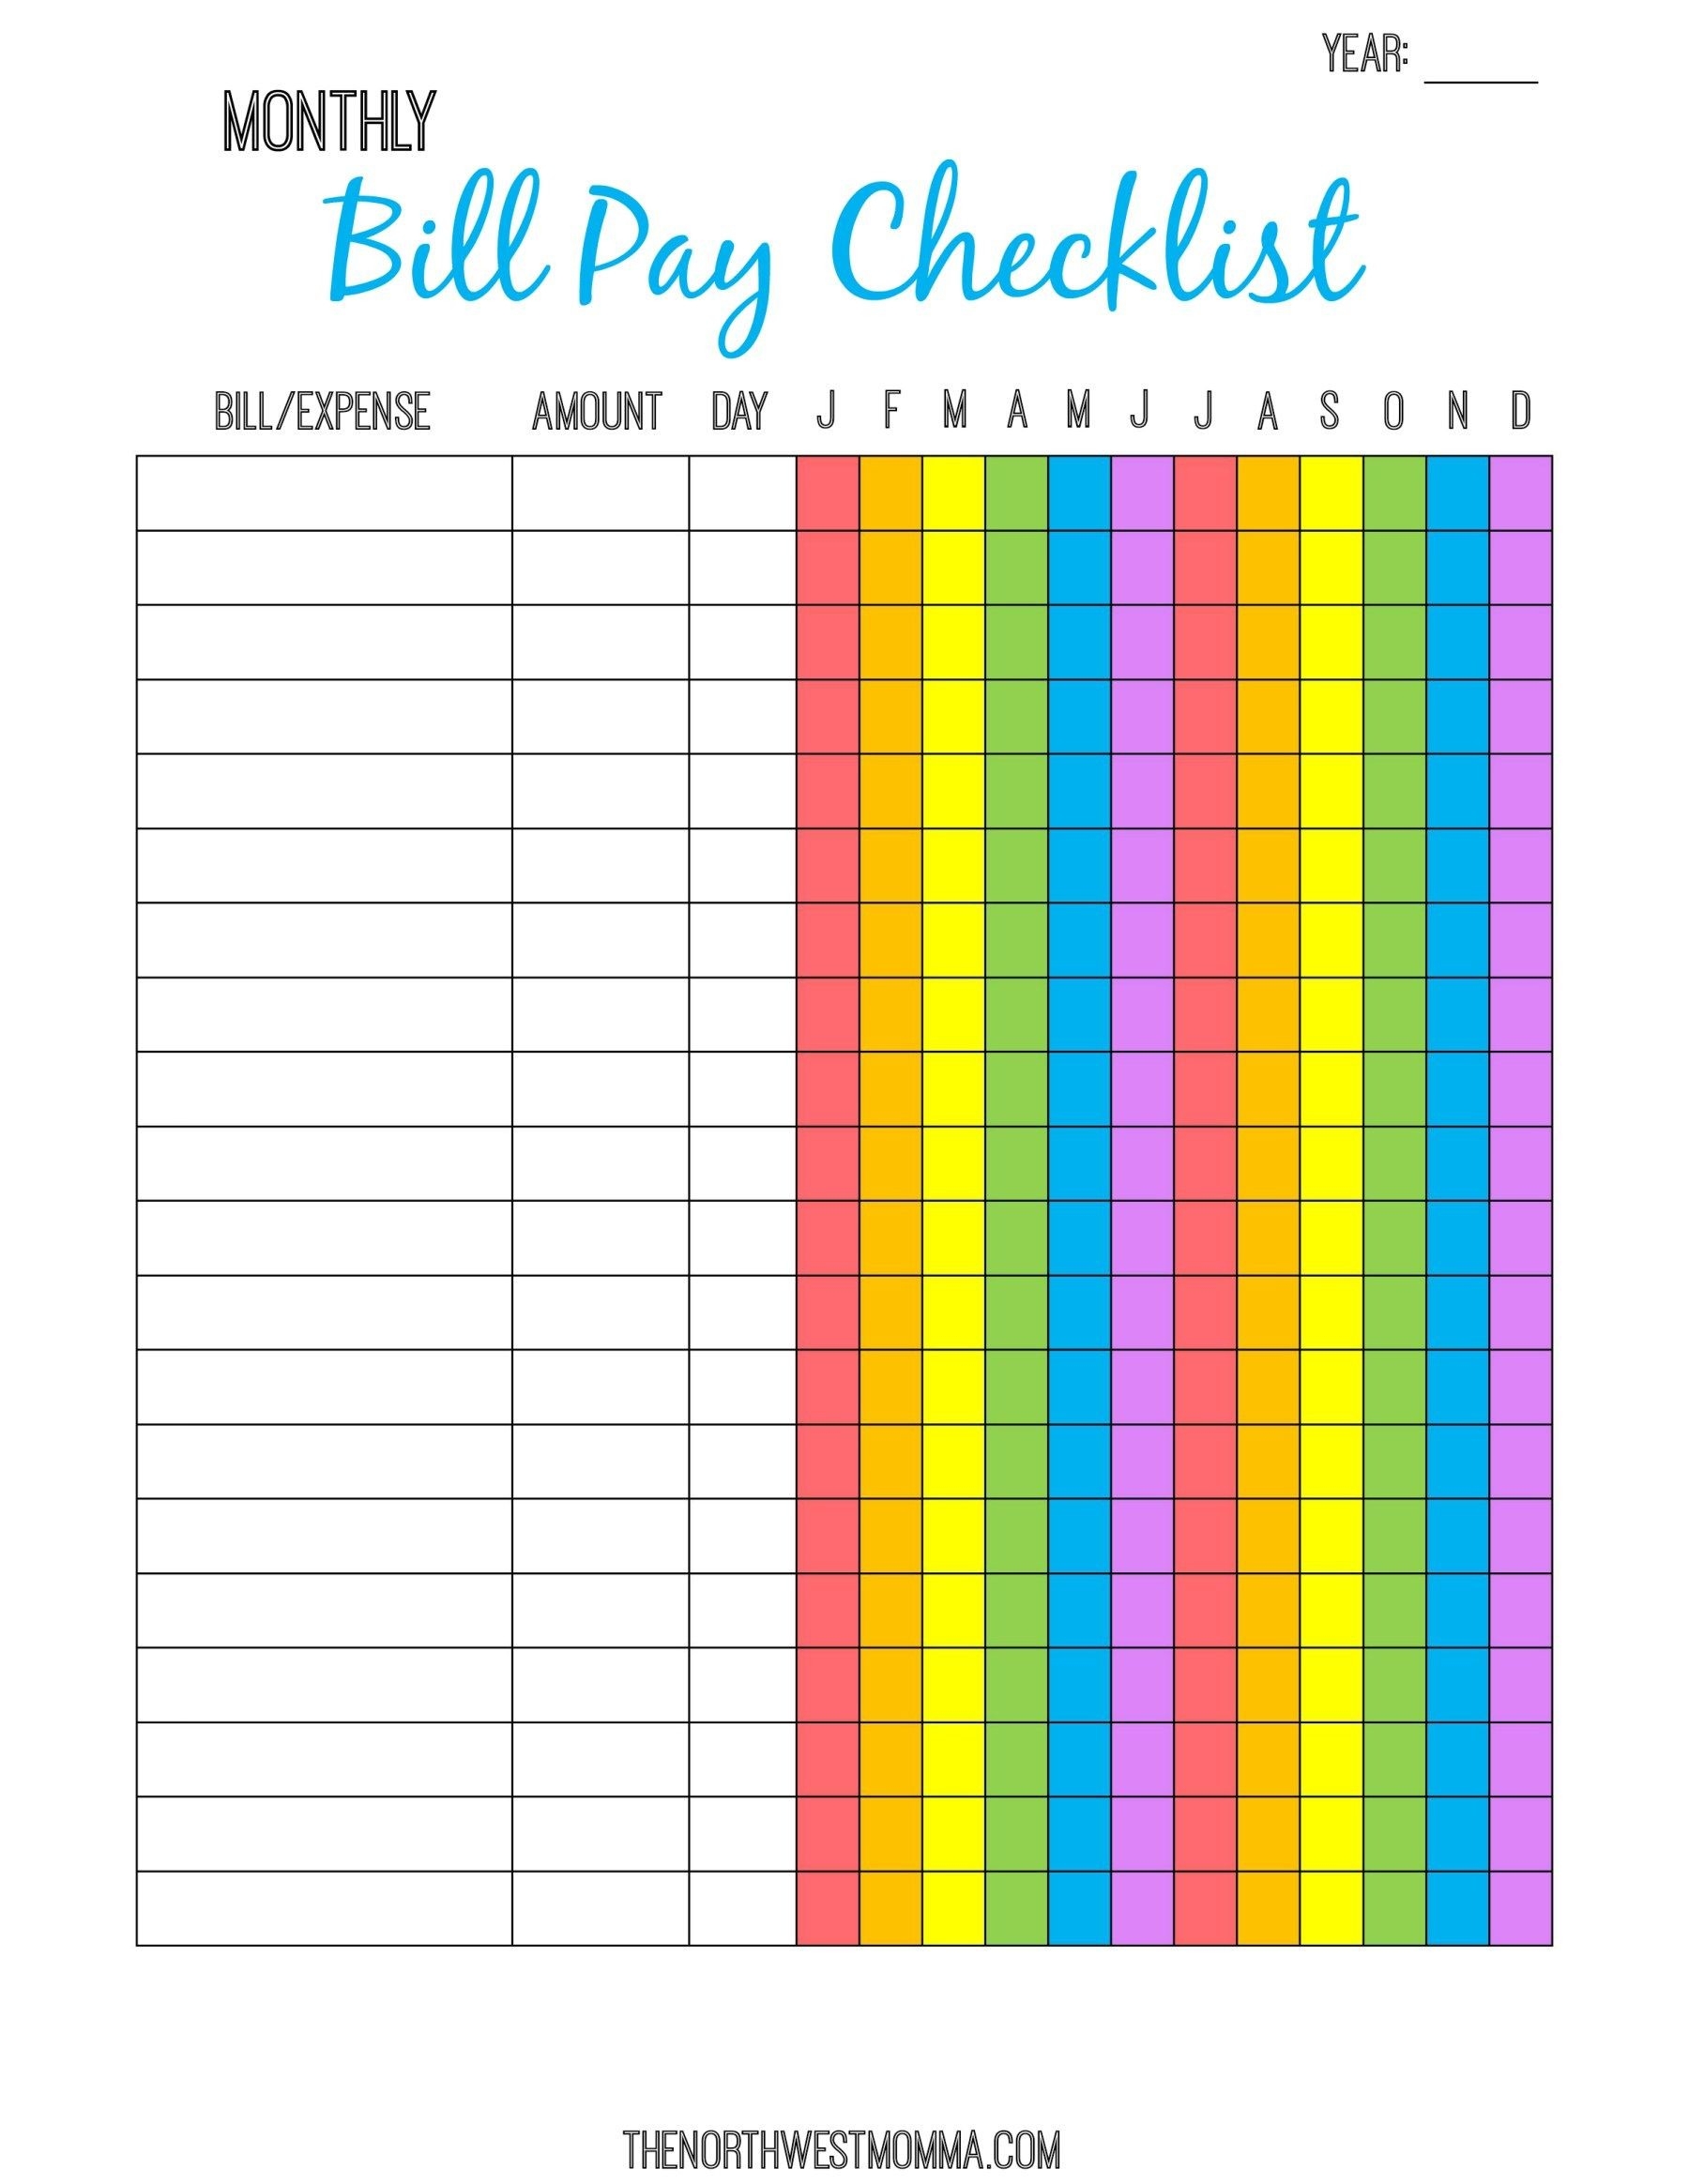 Monthly Bill Pay Checklist- Free Printable! | Bill Payment-Monthly Bills List Printable